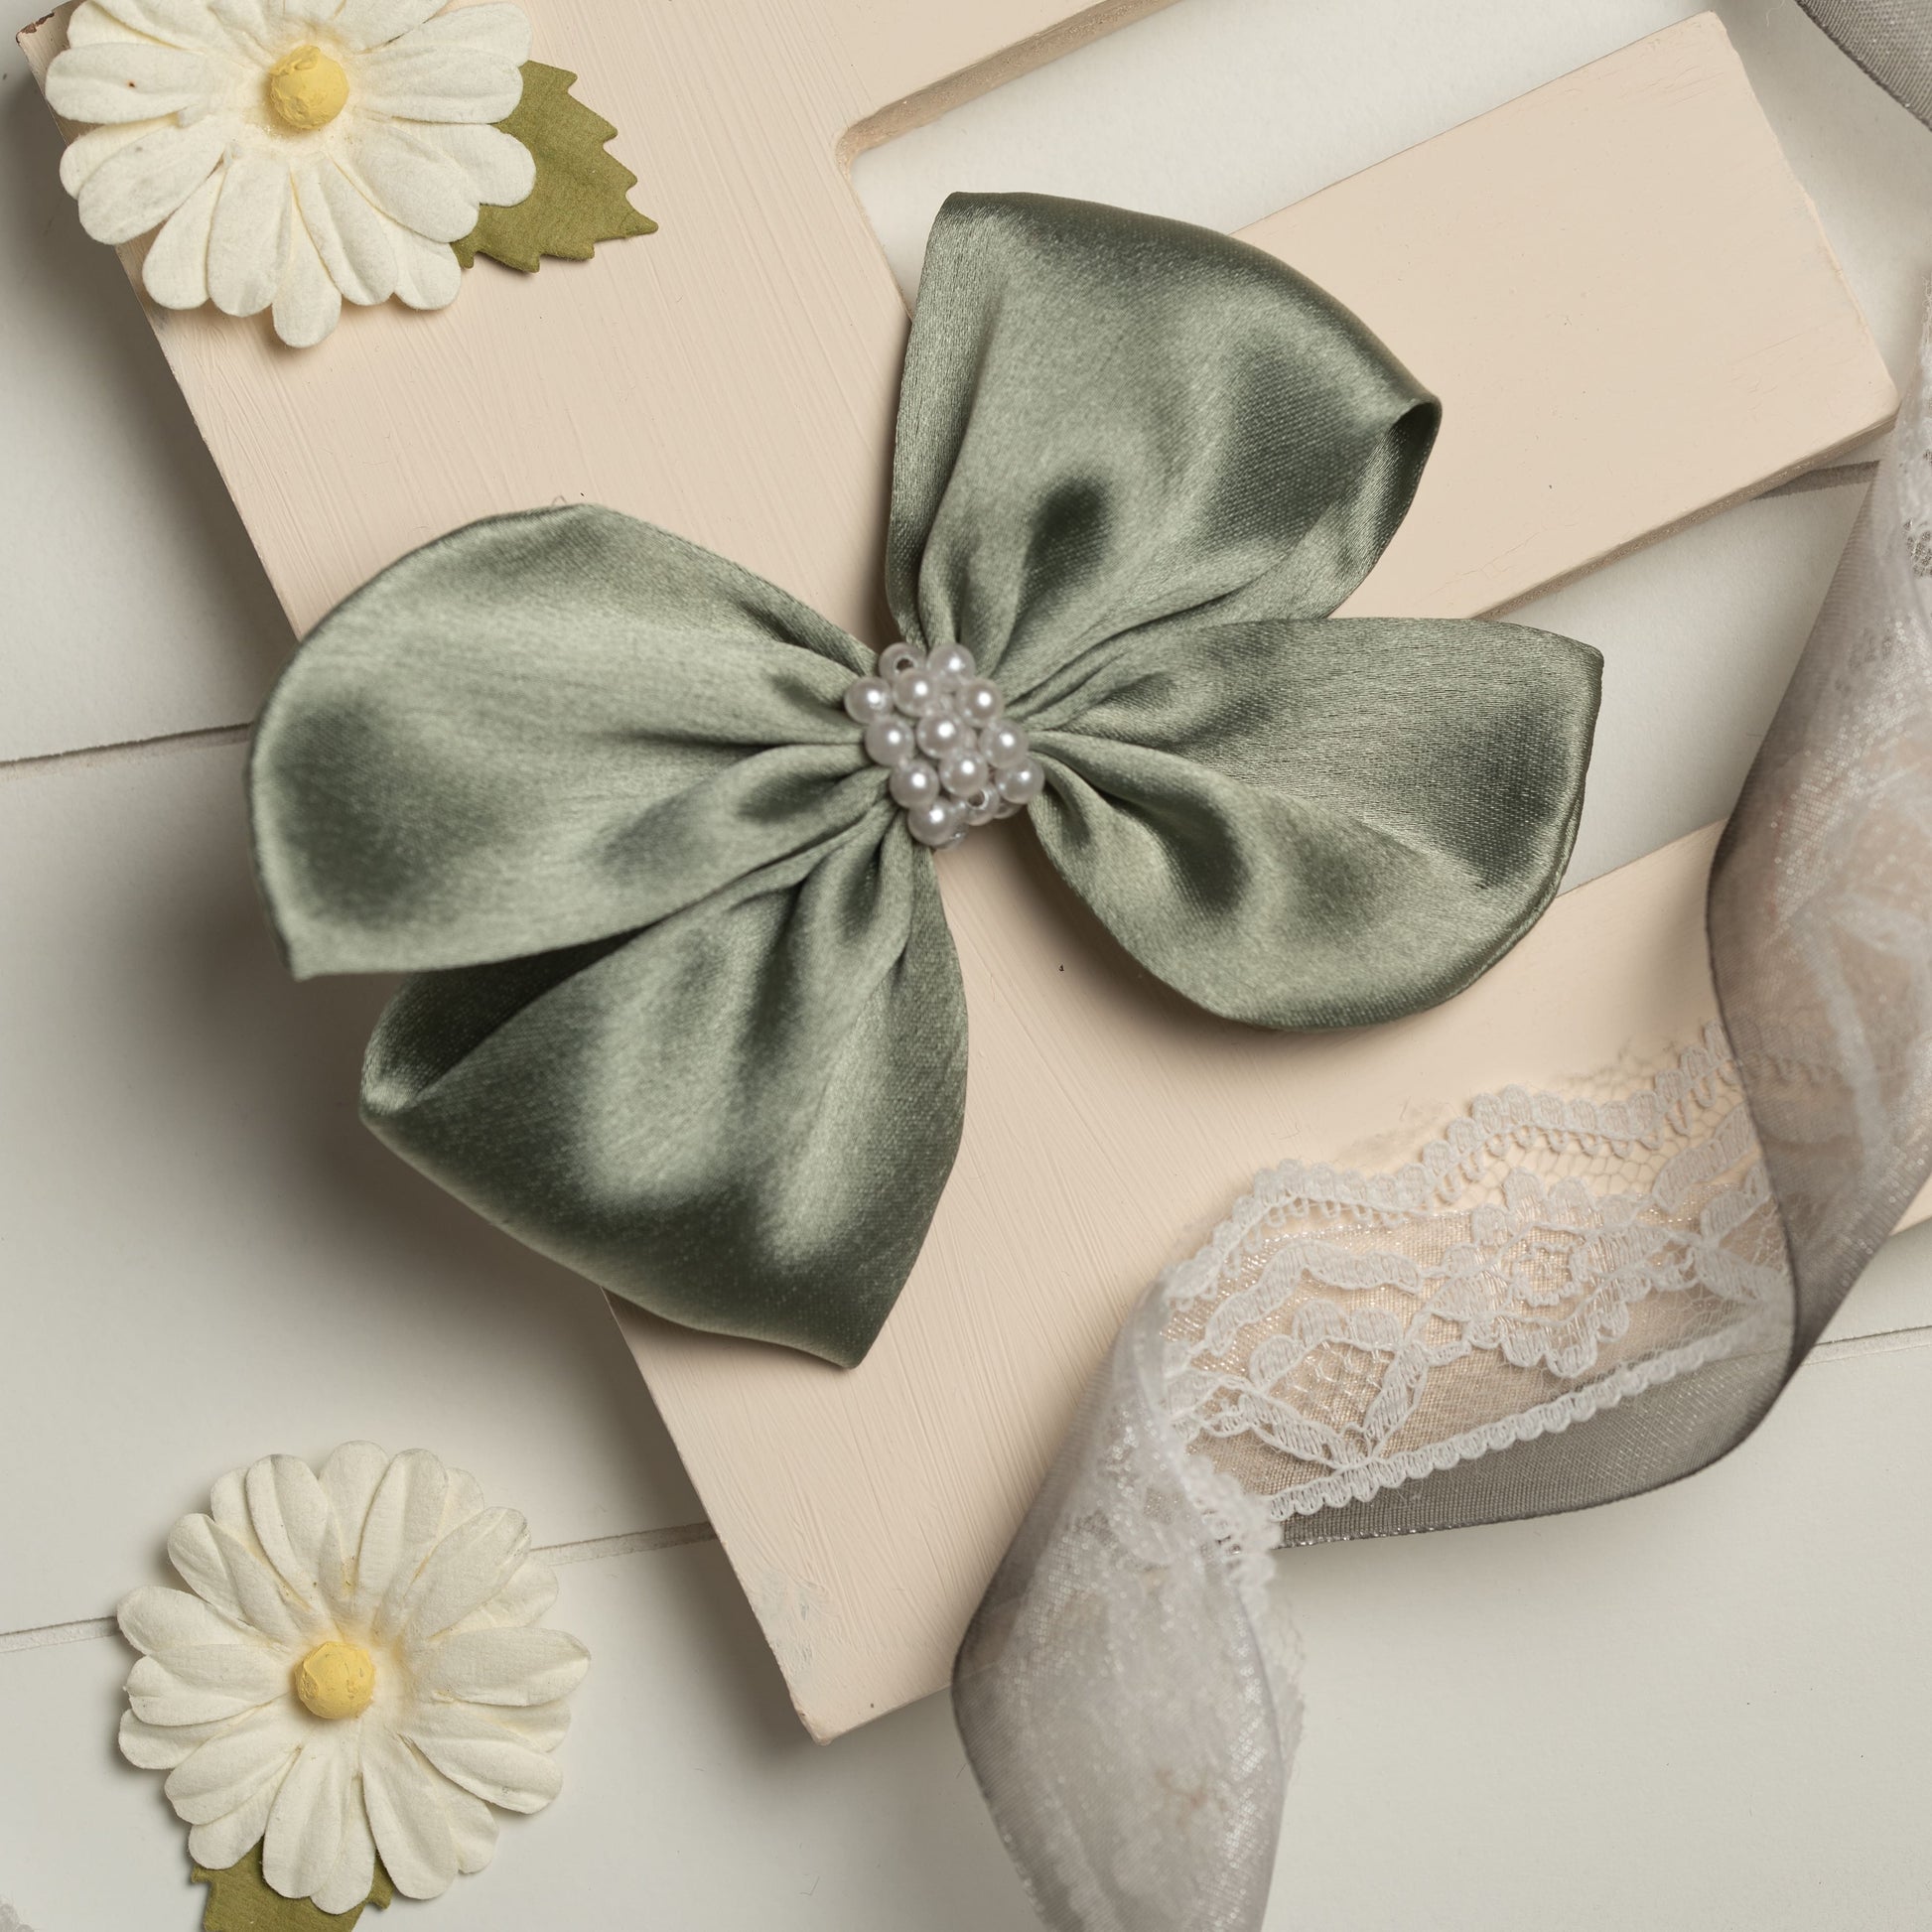 Ribbon Candy - Pearl Detailed Cute Satin Bow on Alligator clip - Olive Green